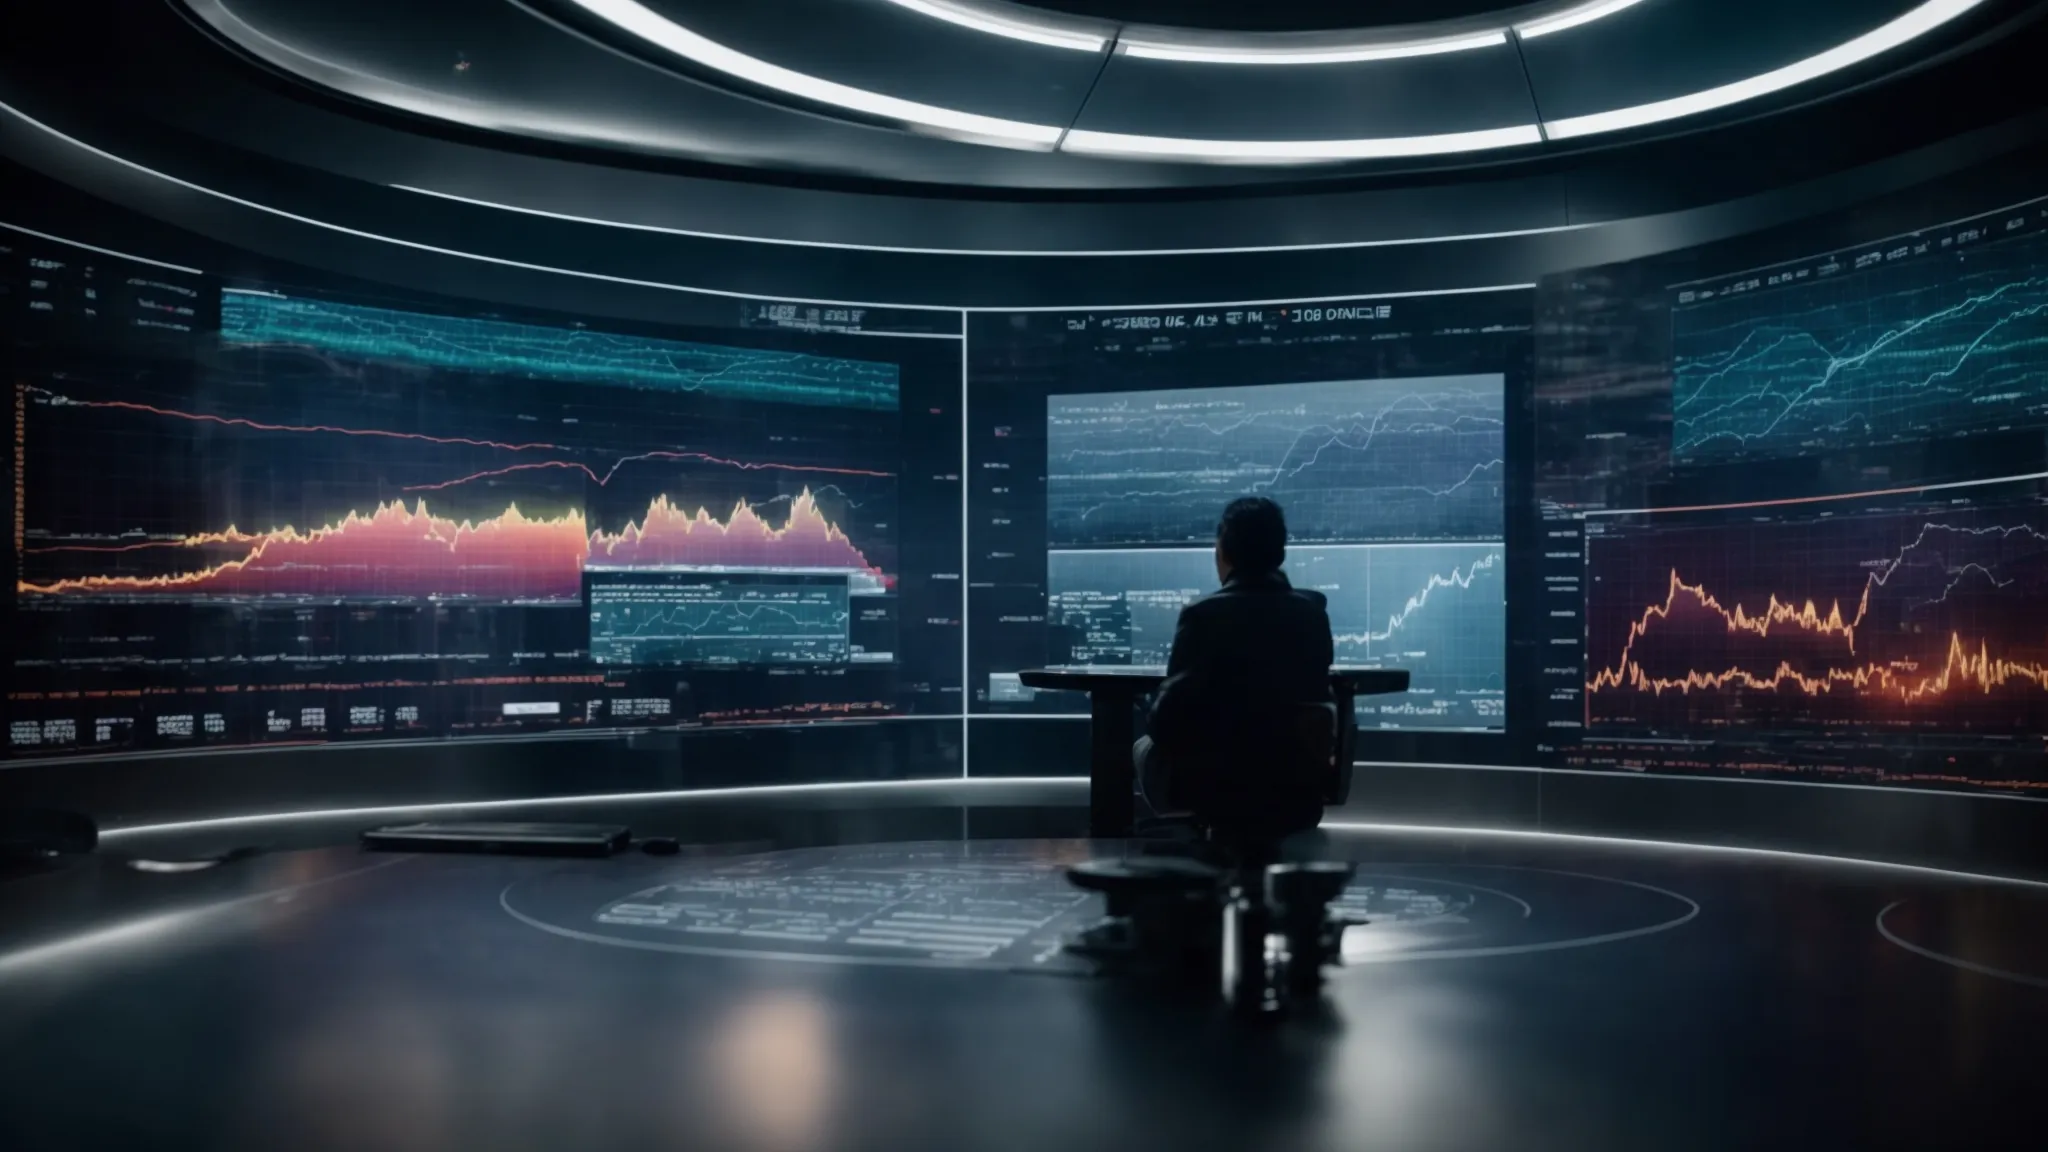 a futuristic control room with a large digital screen displaying graphs and analytics while a marketing professional analyzes data streams.